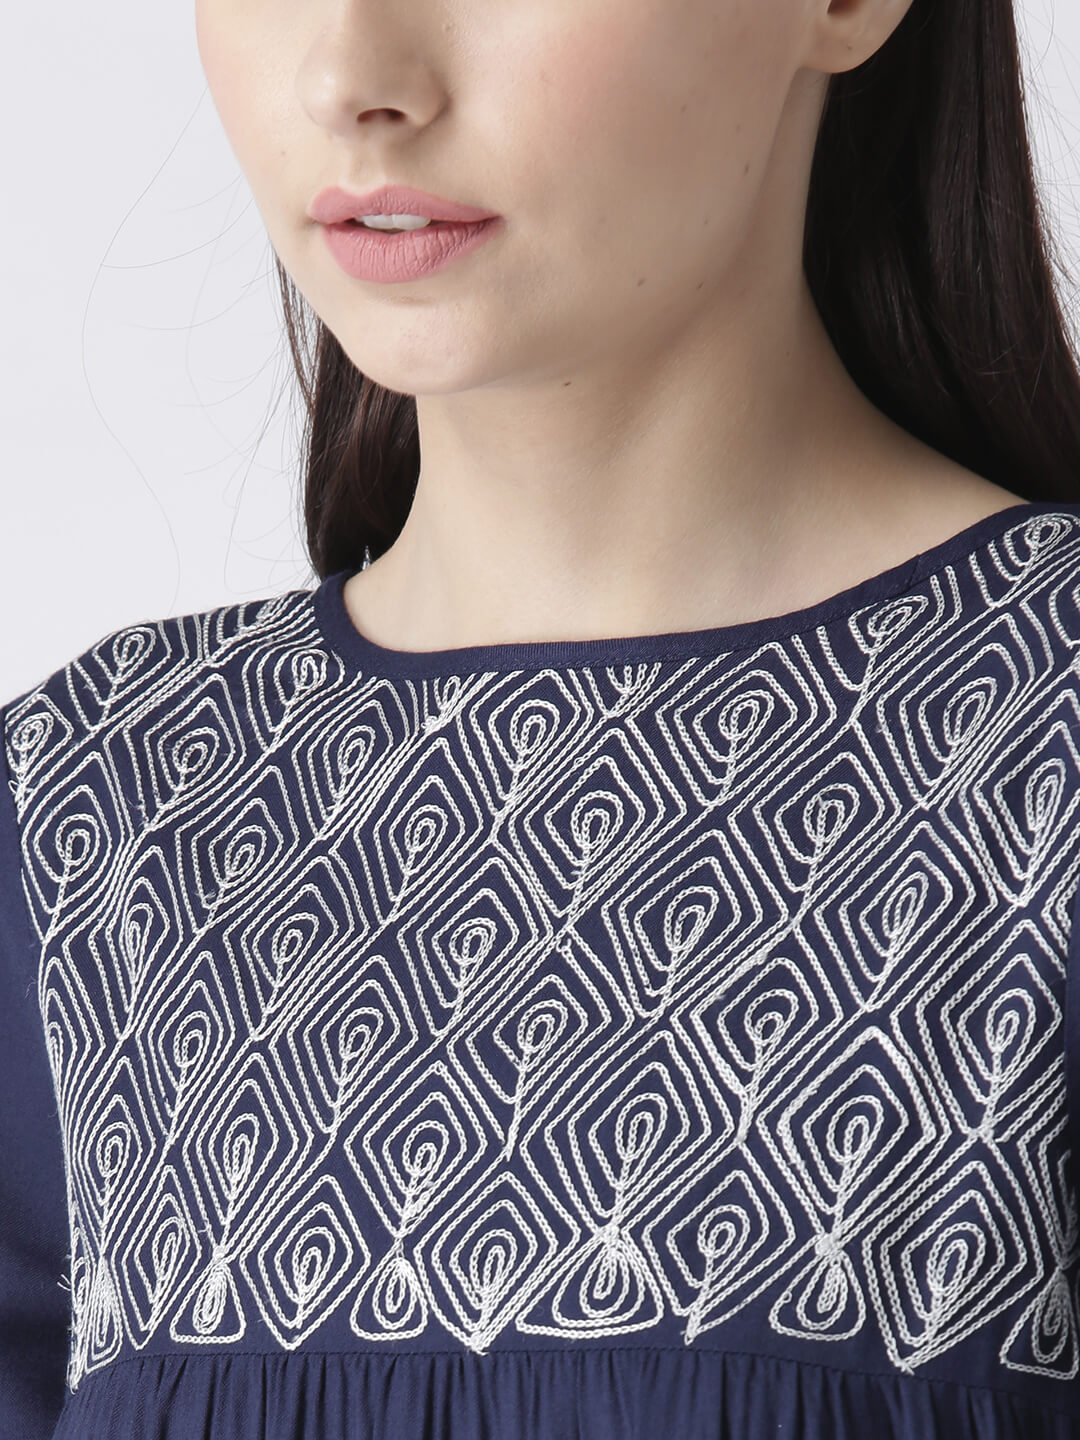 Msfq Women'S Navy Top With Embroidered Yoke